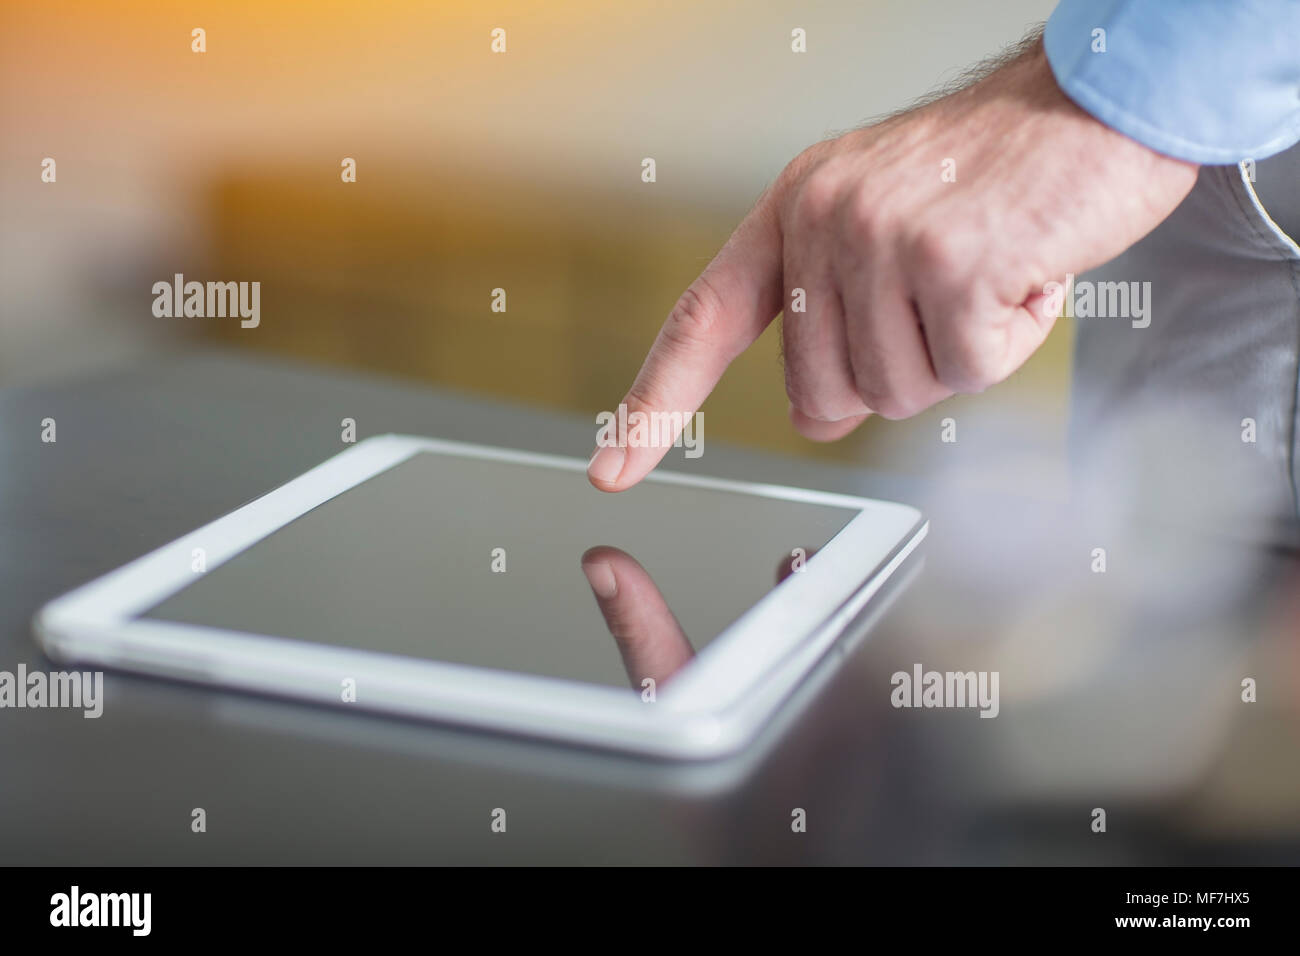 Man using tablet in office, close-up Stock Photo